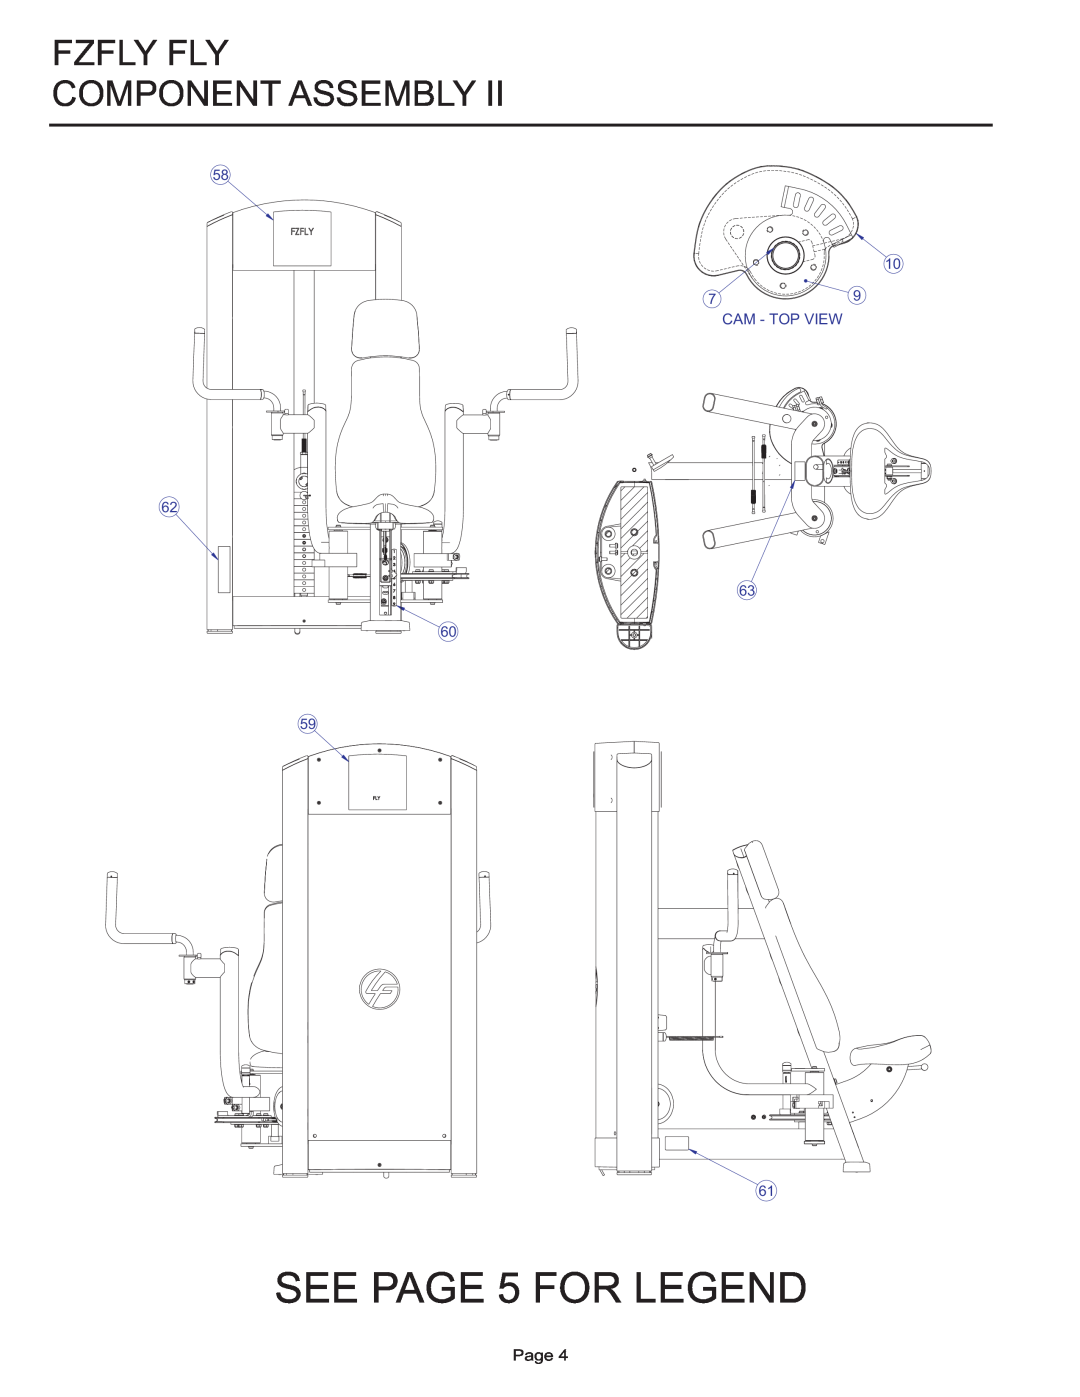 Life Fitness manual SEE PAGE 5 FOR LEGEND, Fzfly Fly Component Assembly, Page, Cam - Top View 